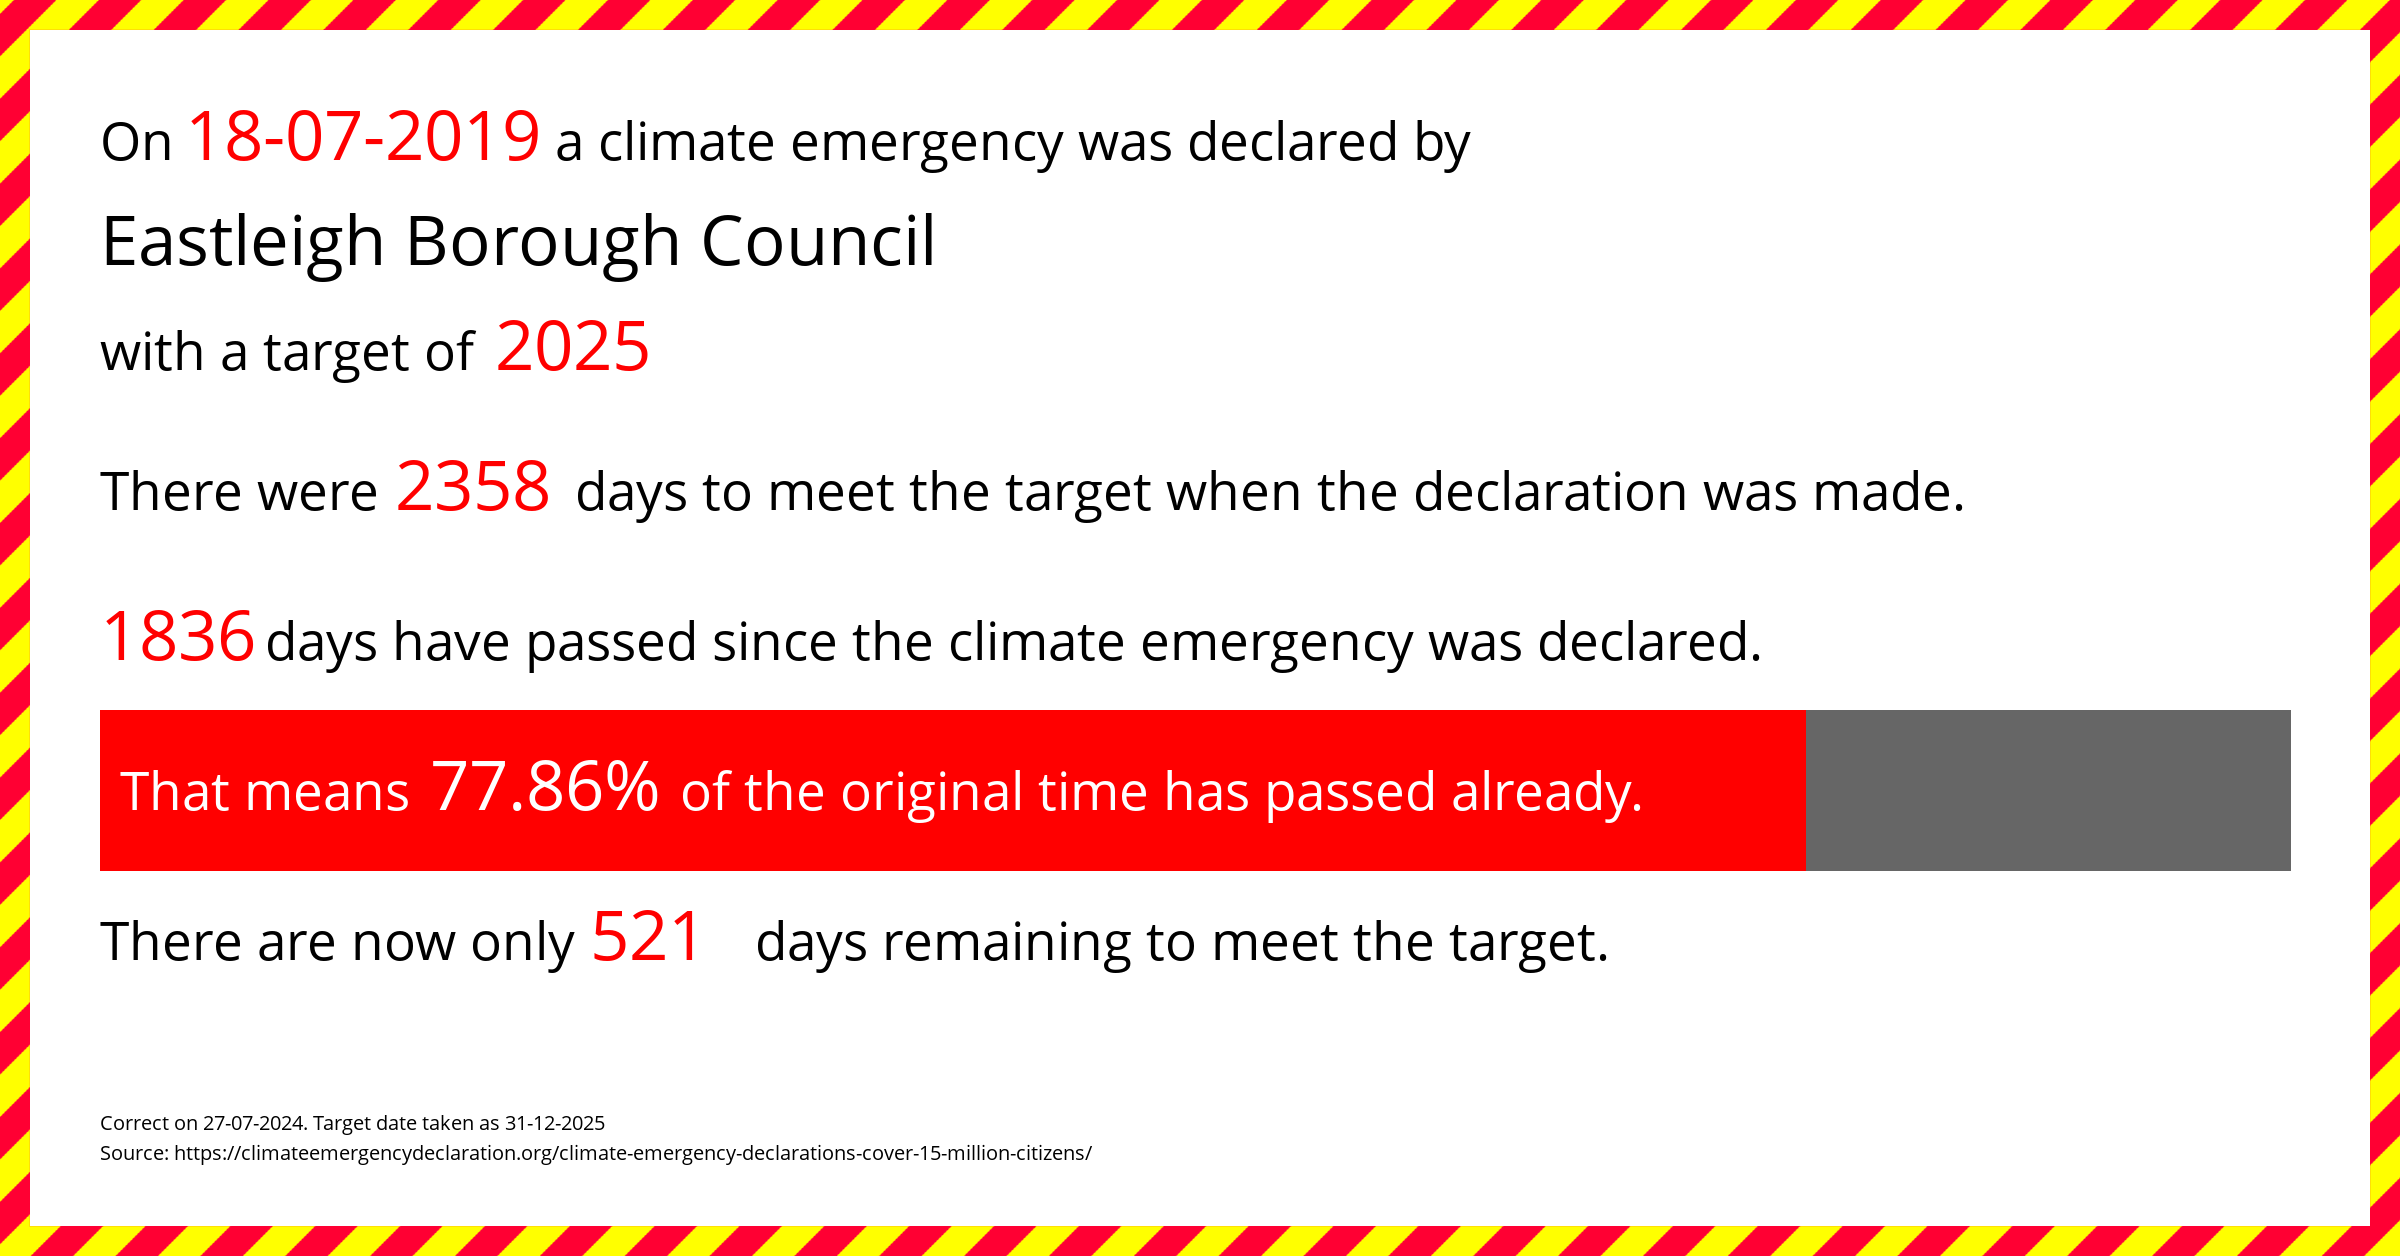 Eastleigh Borough Council declared a Climate emergency on Thursday 18th July 2019, with a target of 2025.